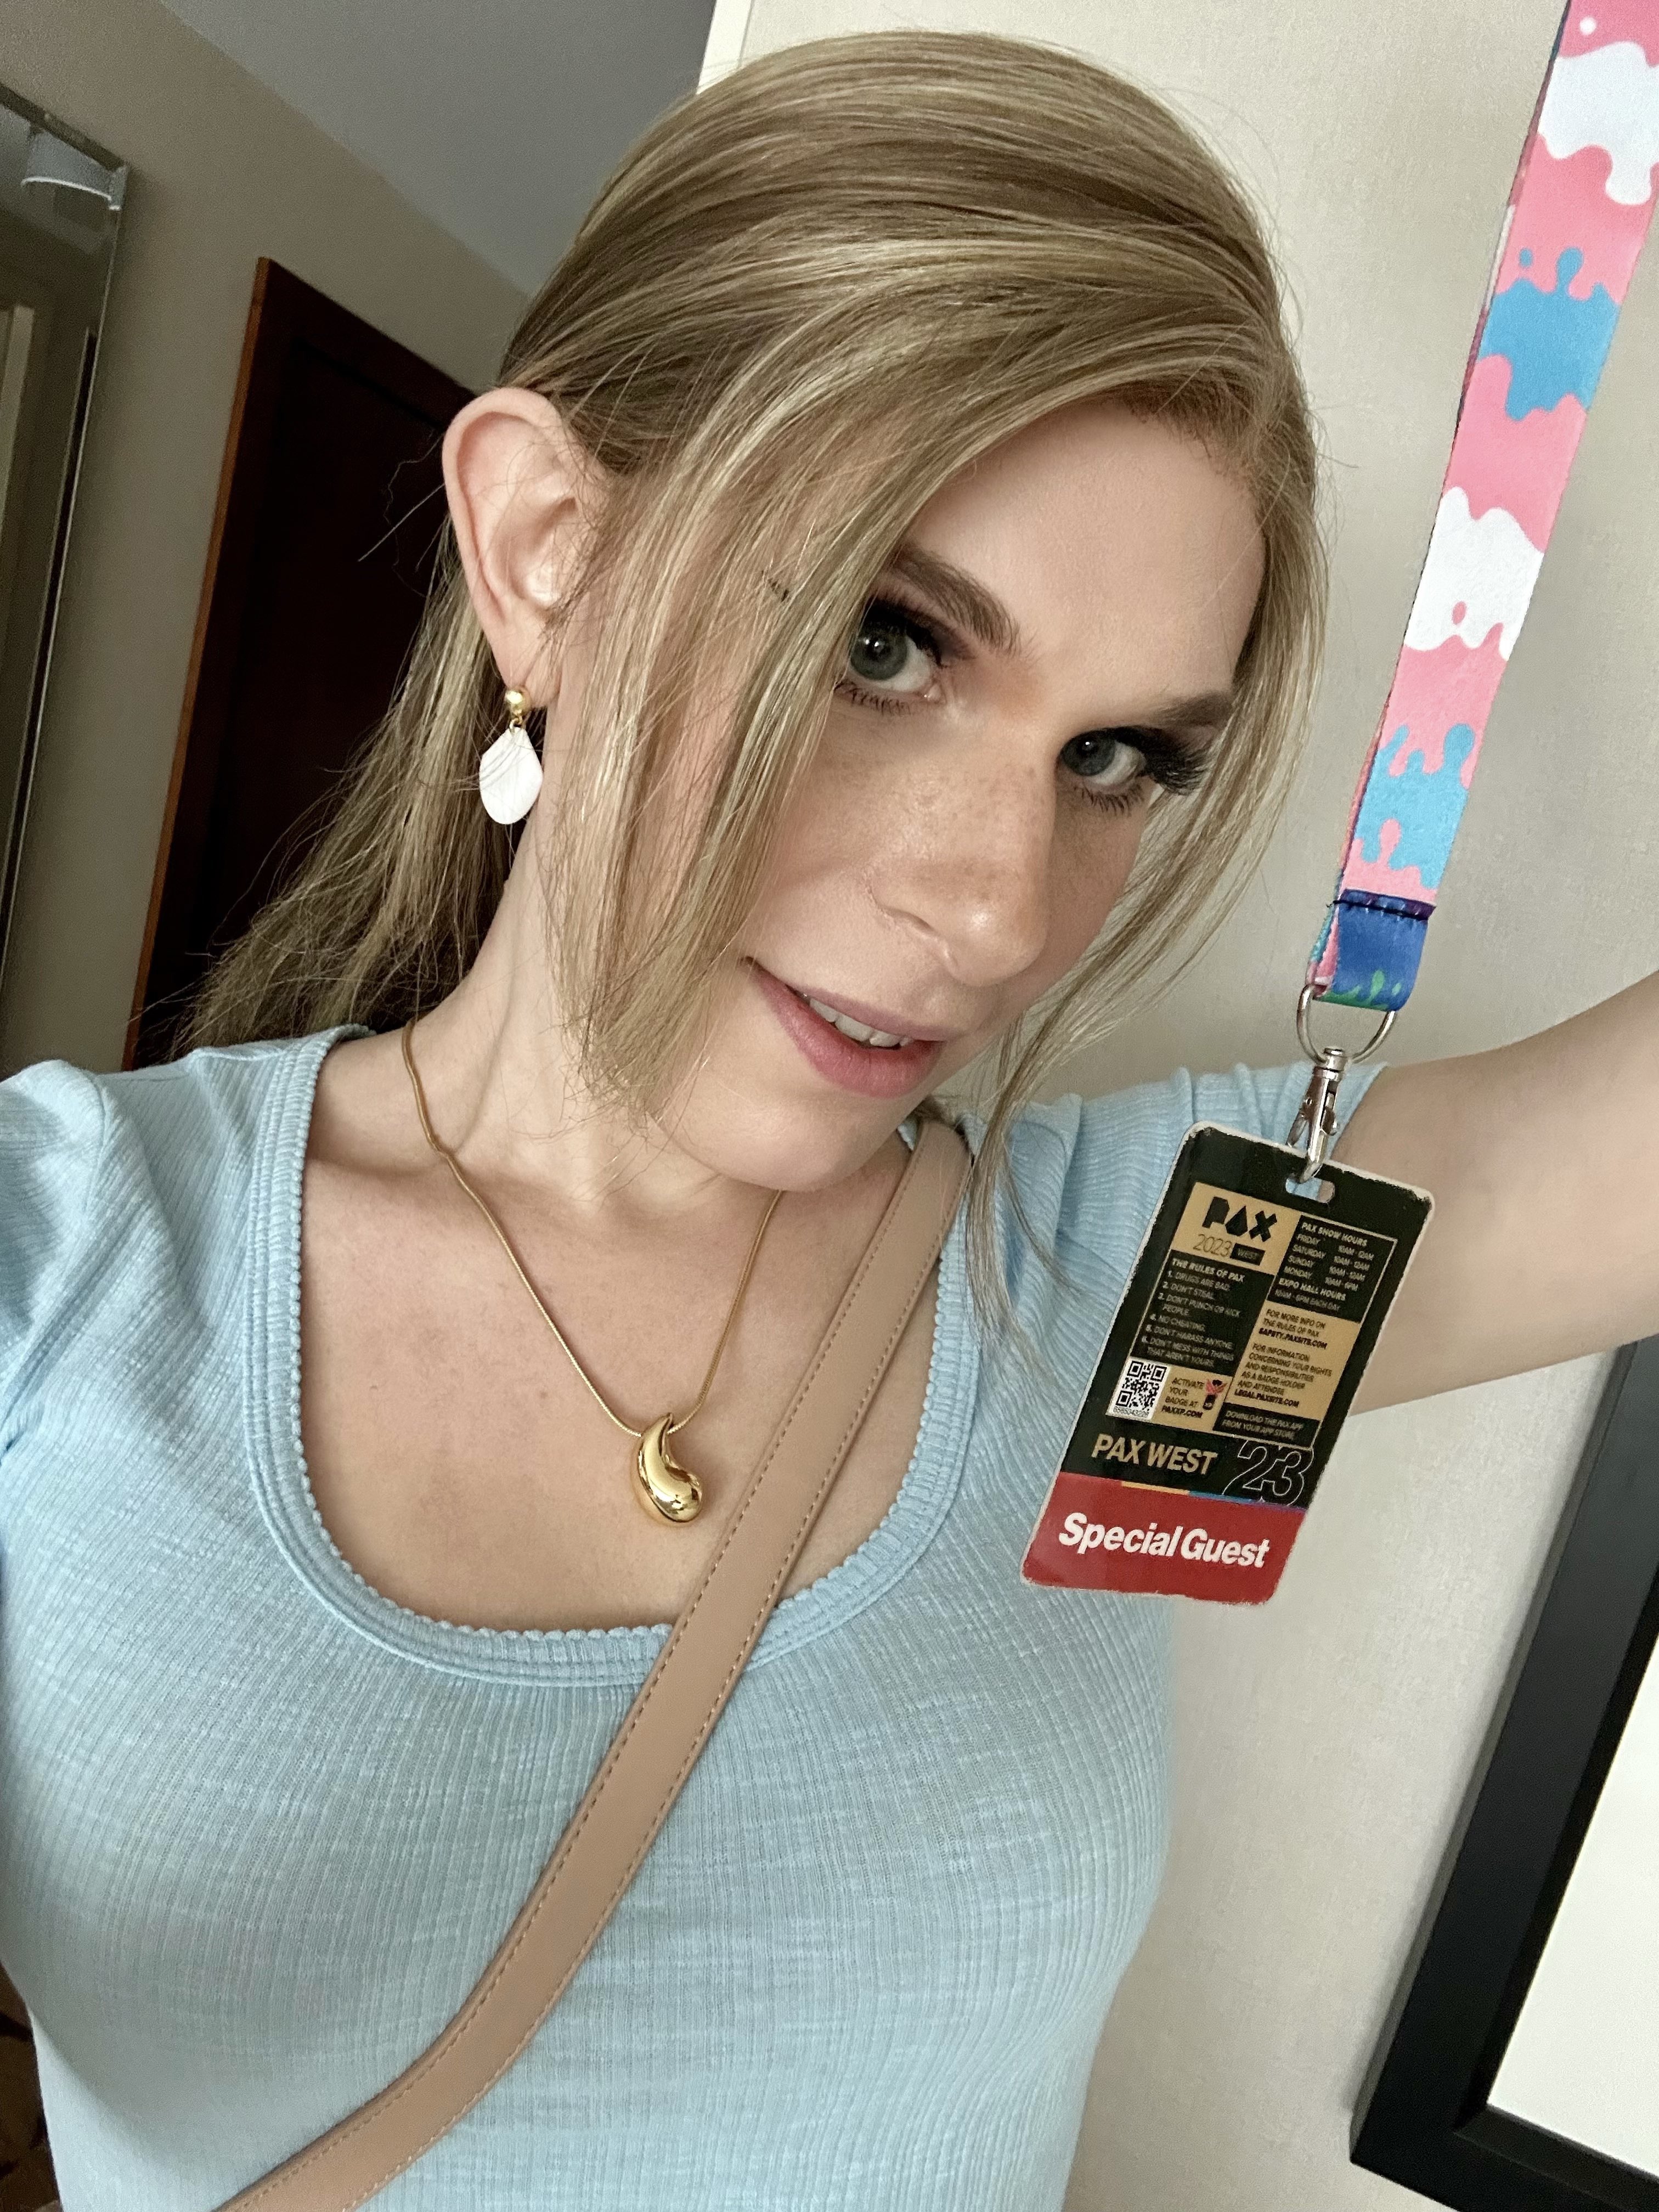 Jess Rappaport 🏳️‍⚧️ on X: #PAXWest badge obtained 🎉 https